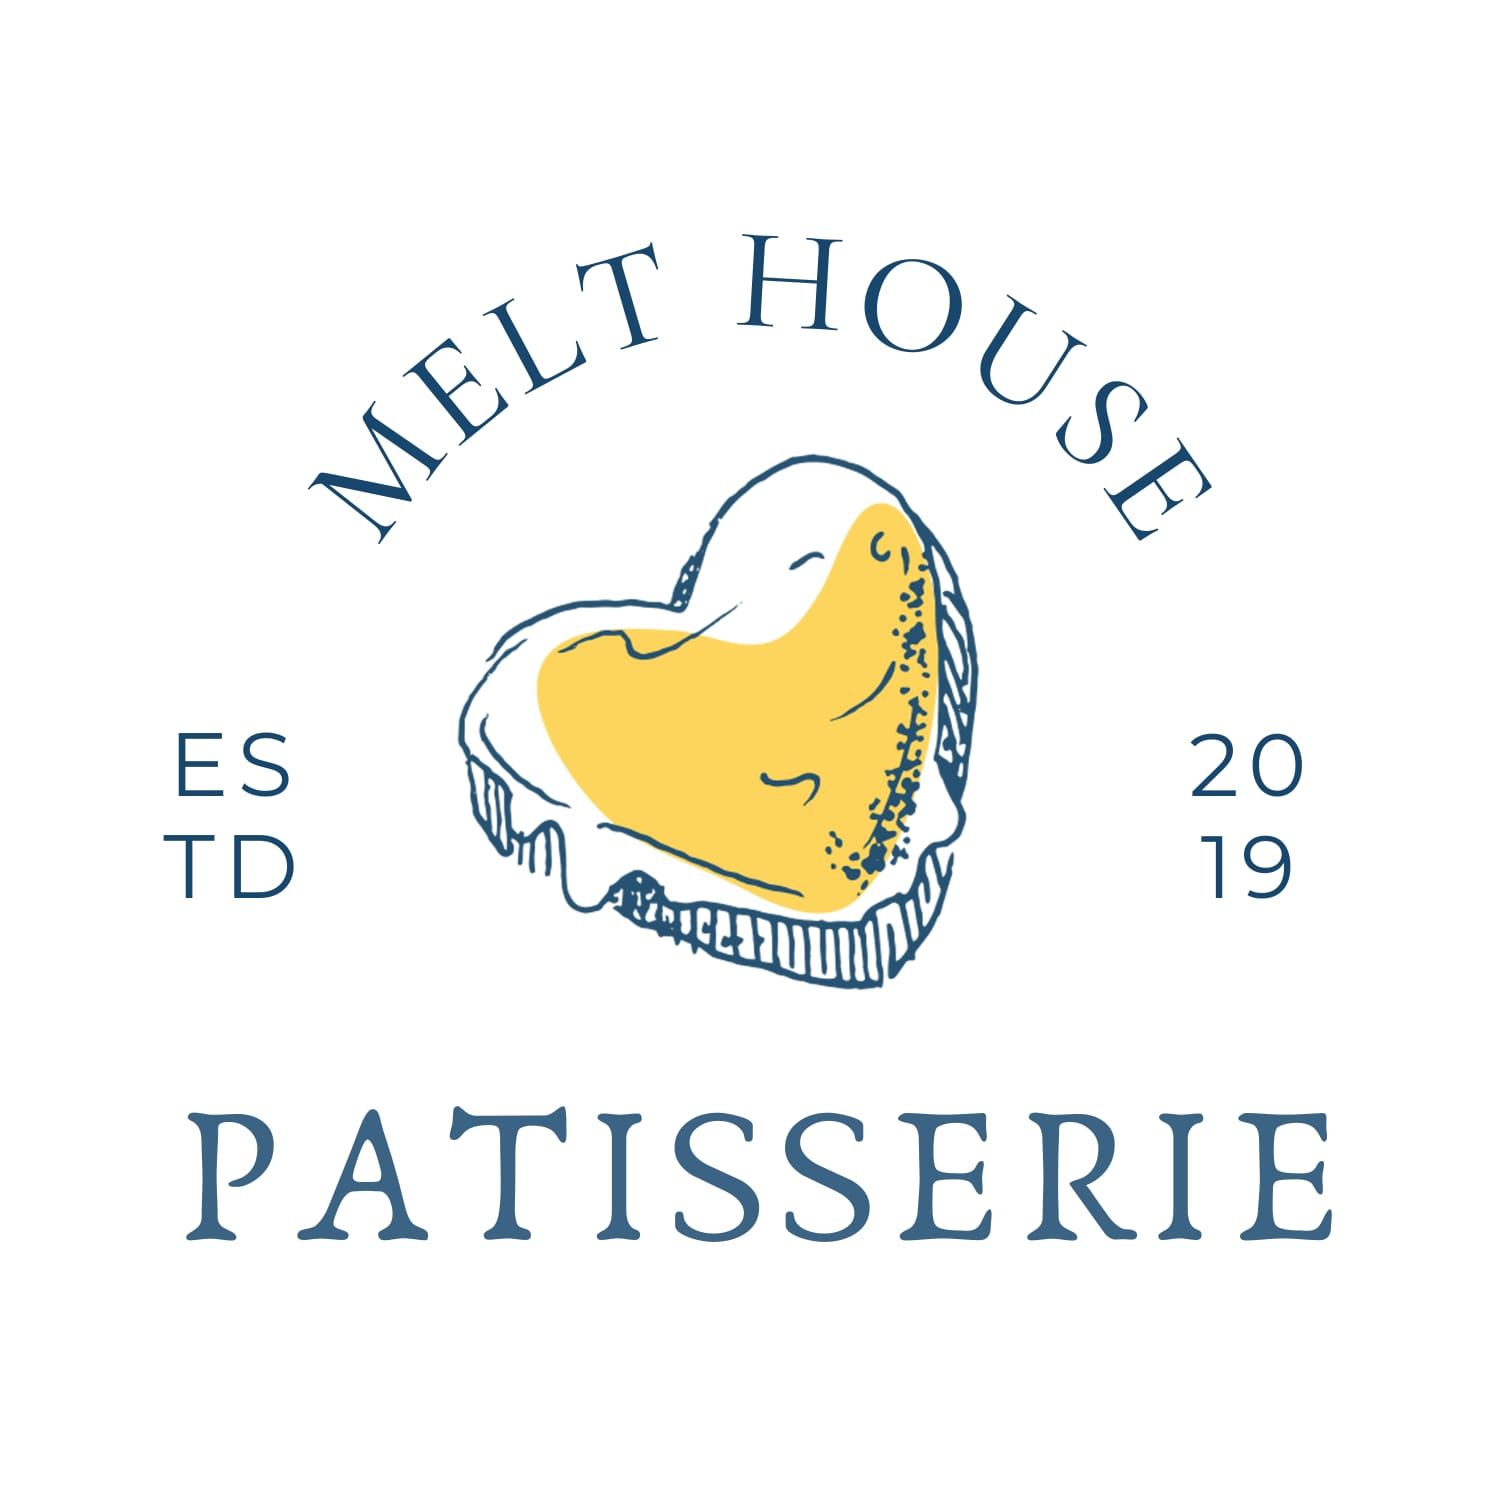 Melthouse Patisserie